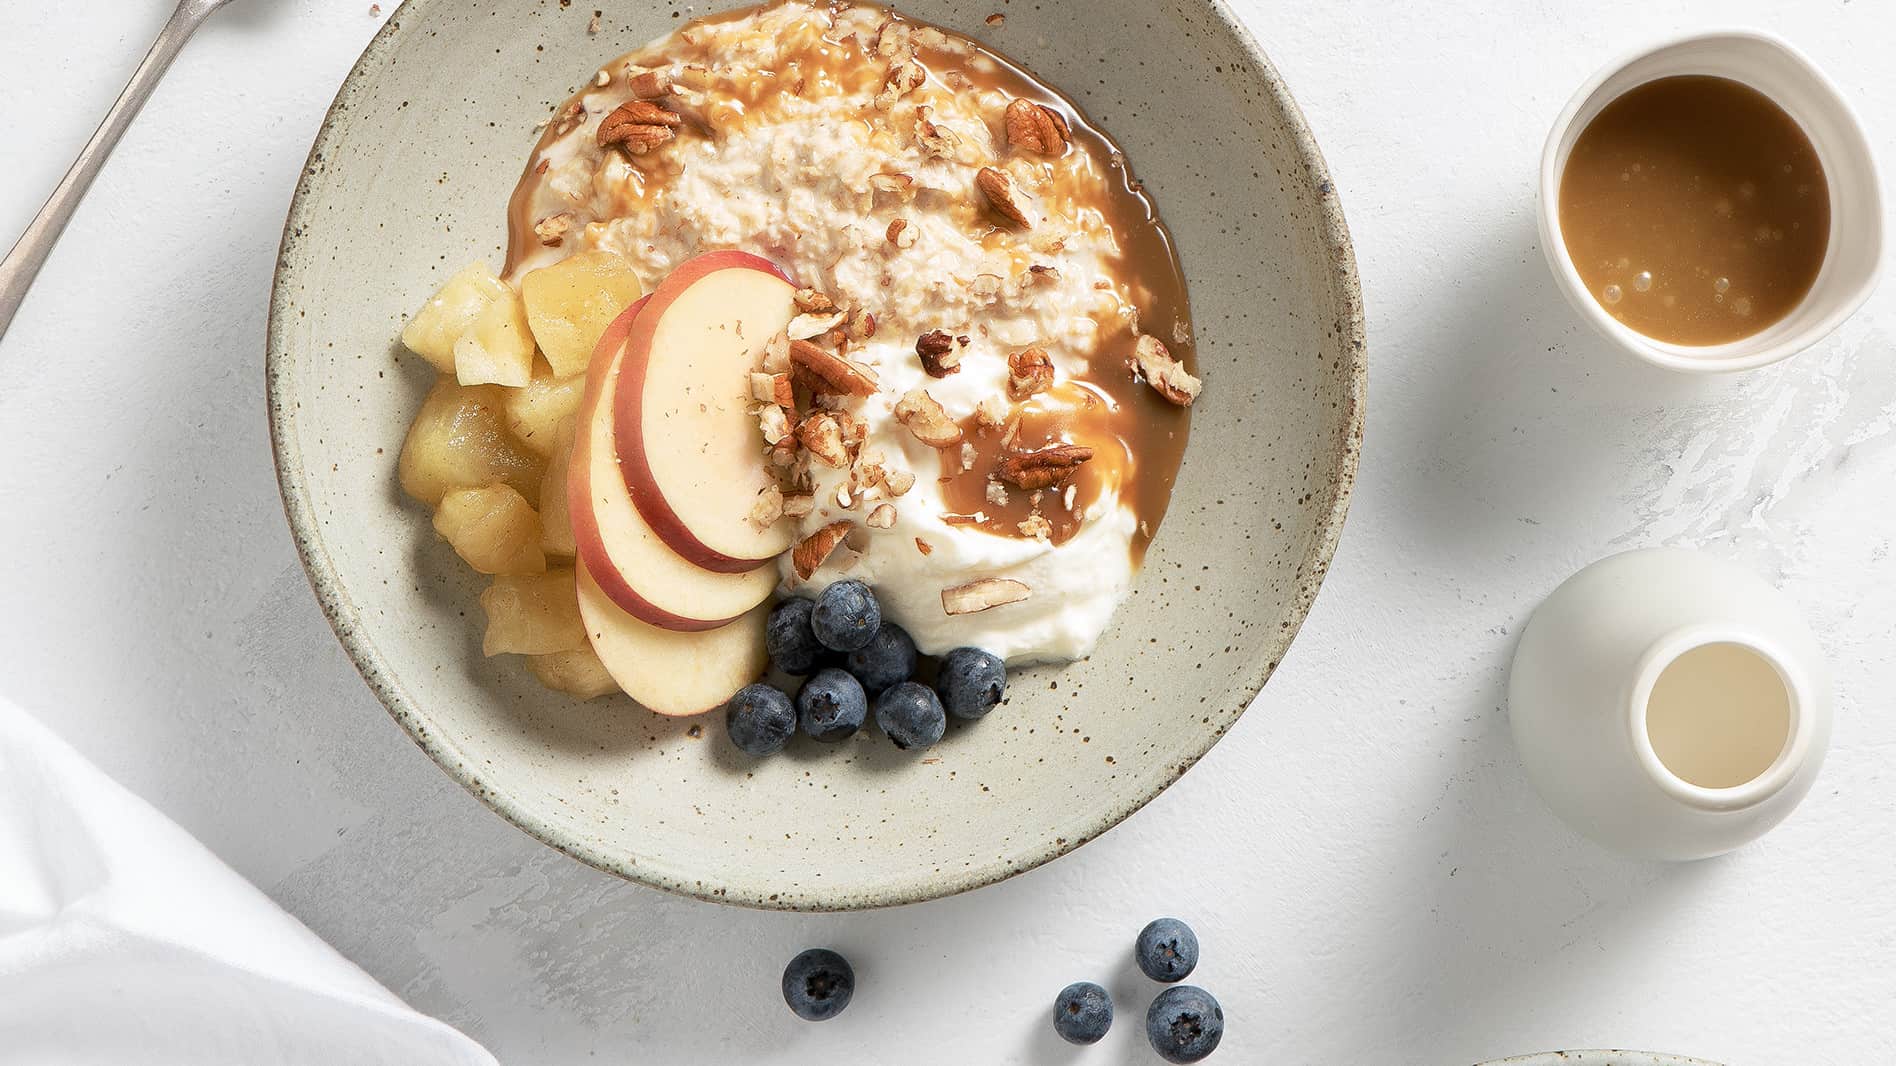 Overnight oats with caramel sauce and apple